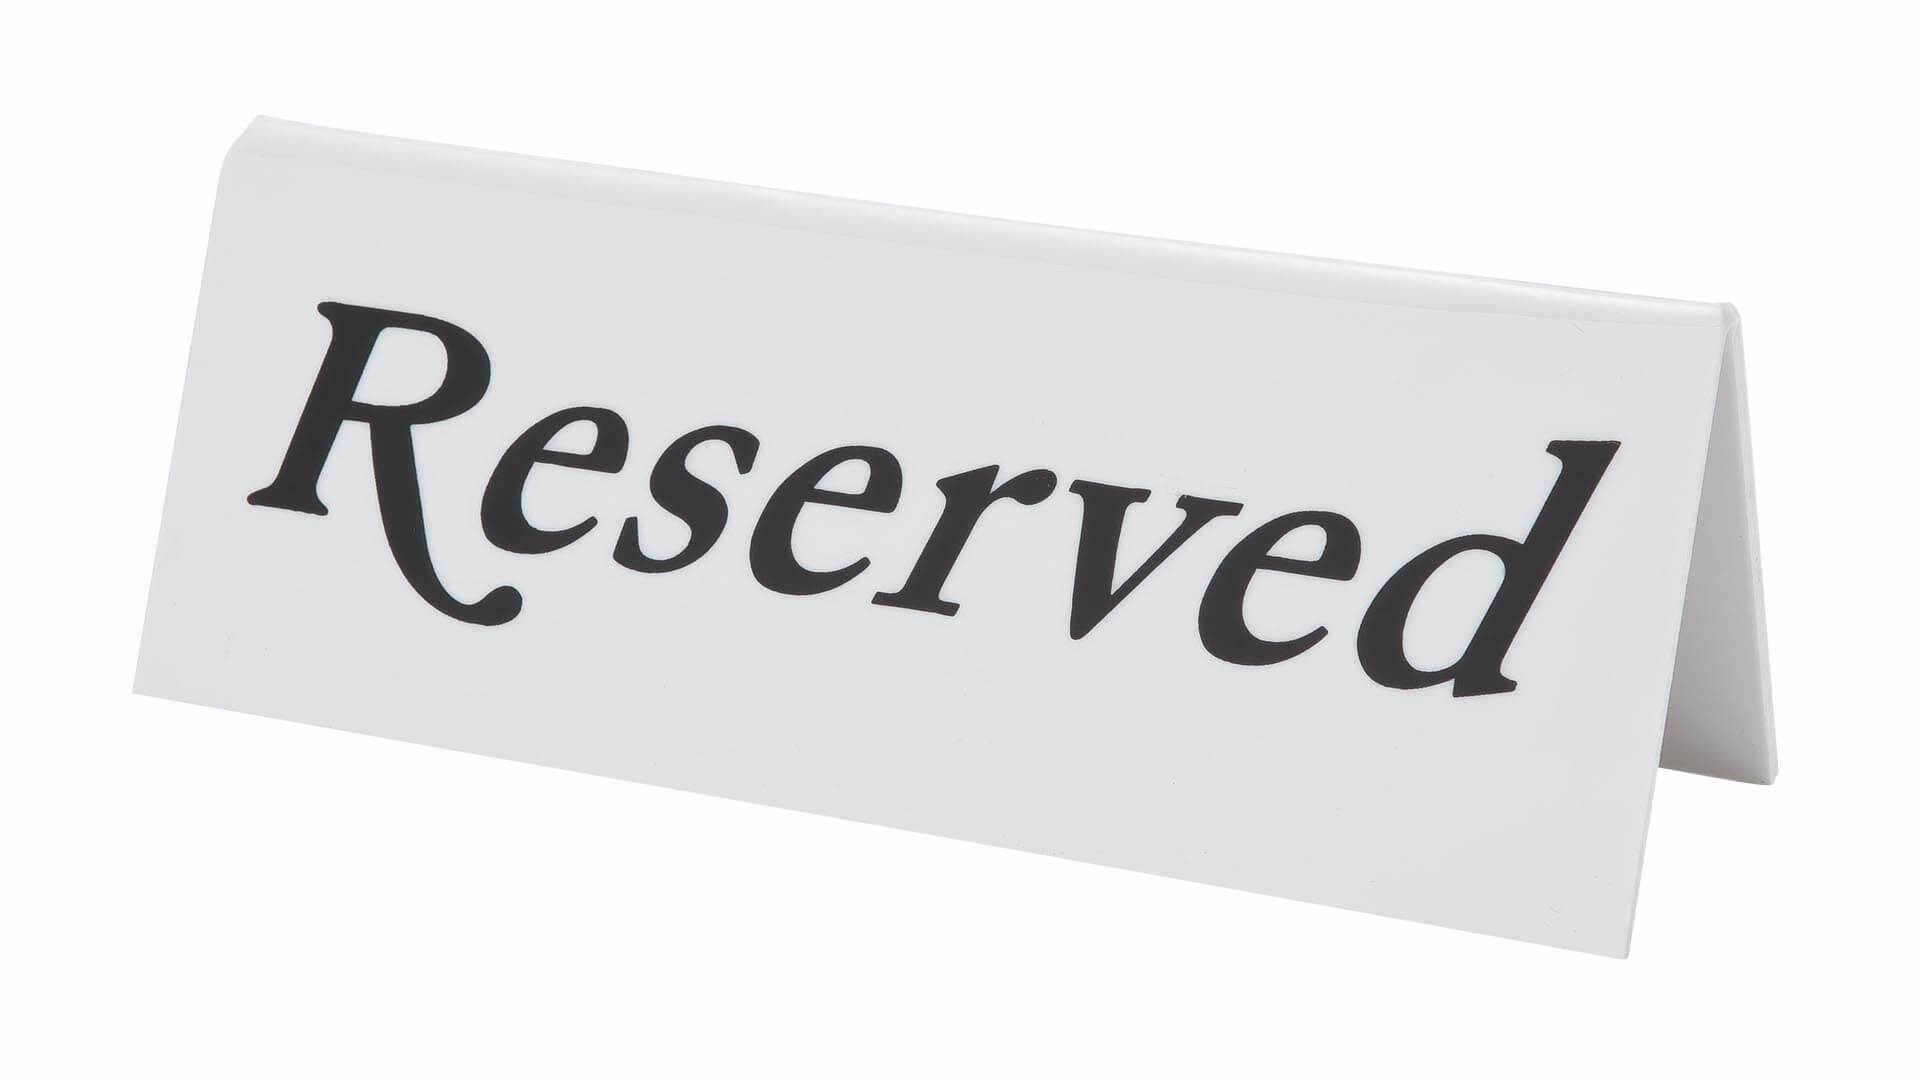 BEAUMONT PLASTIC RESERVED SIGN. BAR-3453